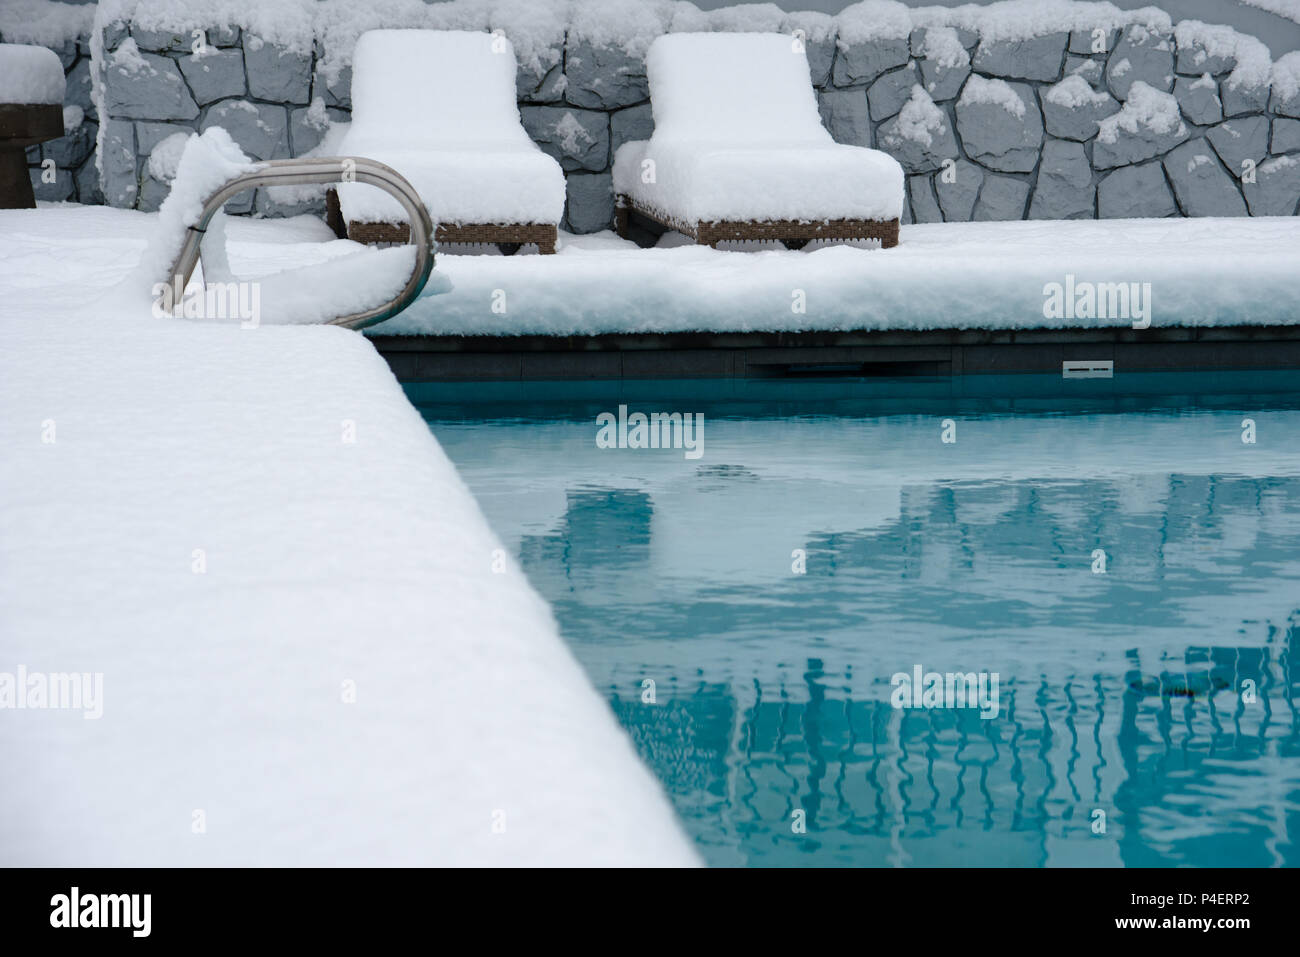 An outdoor swimming pool. the area around it and the lounging chairs covered in over half a foot, 20cm, of snow. Stock Photo